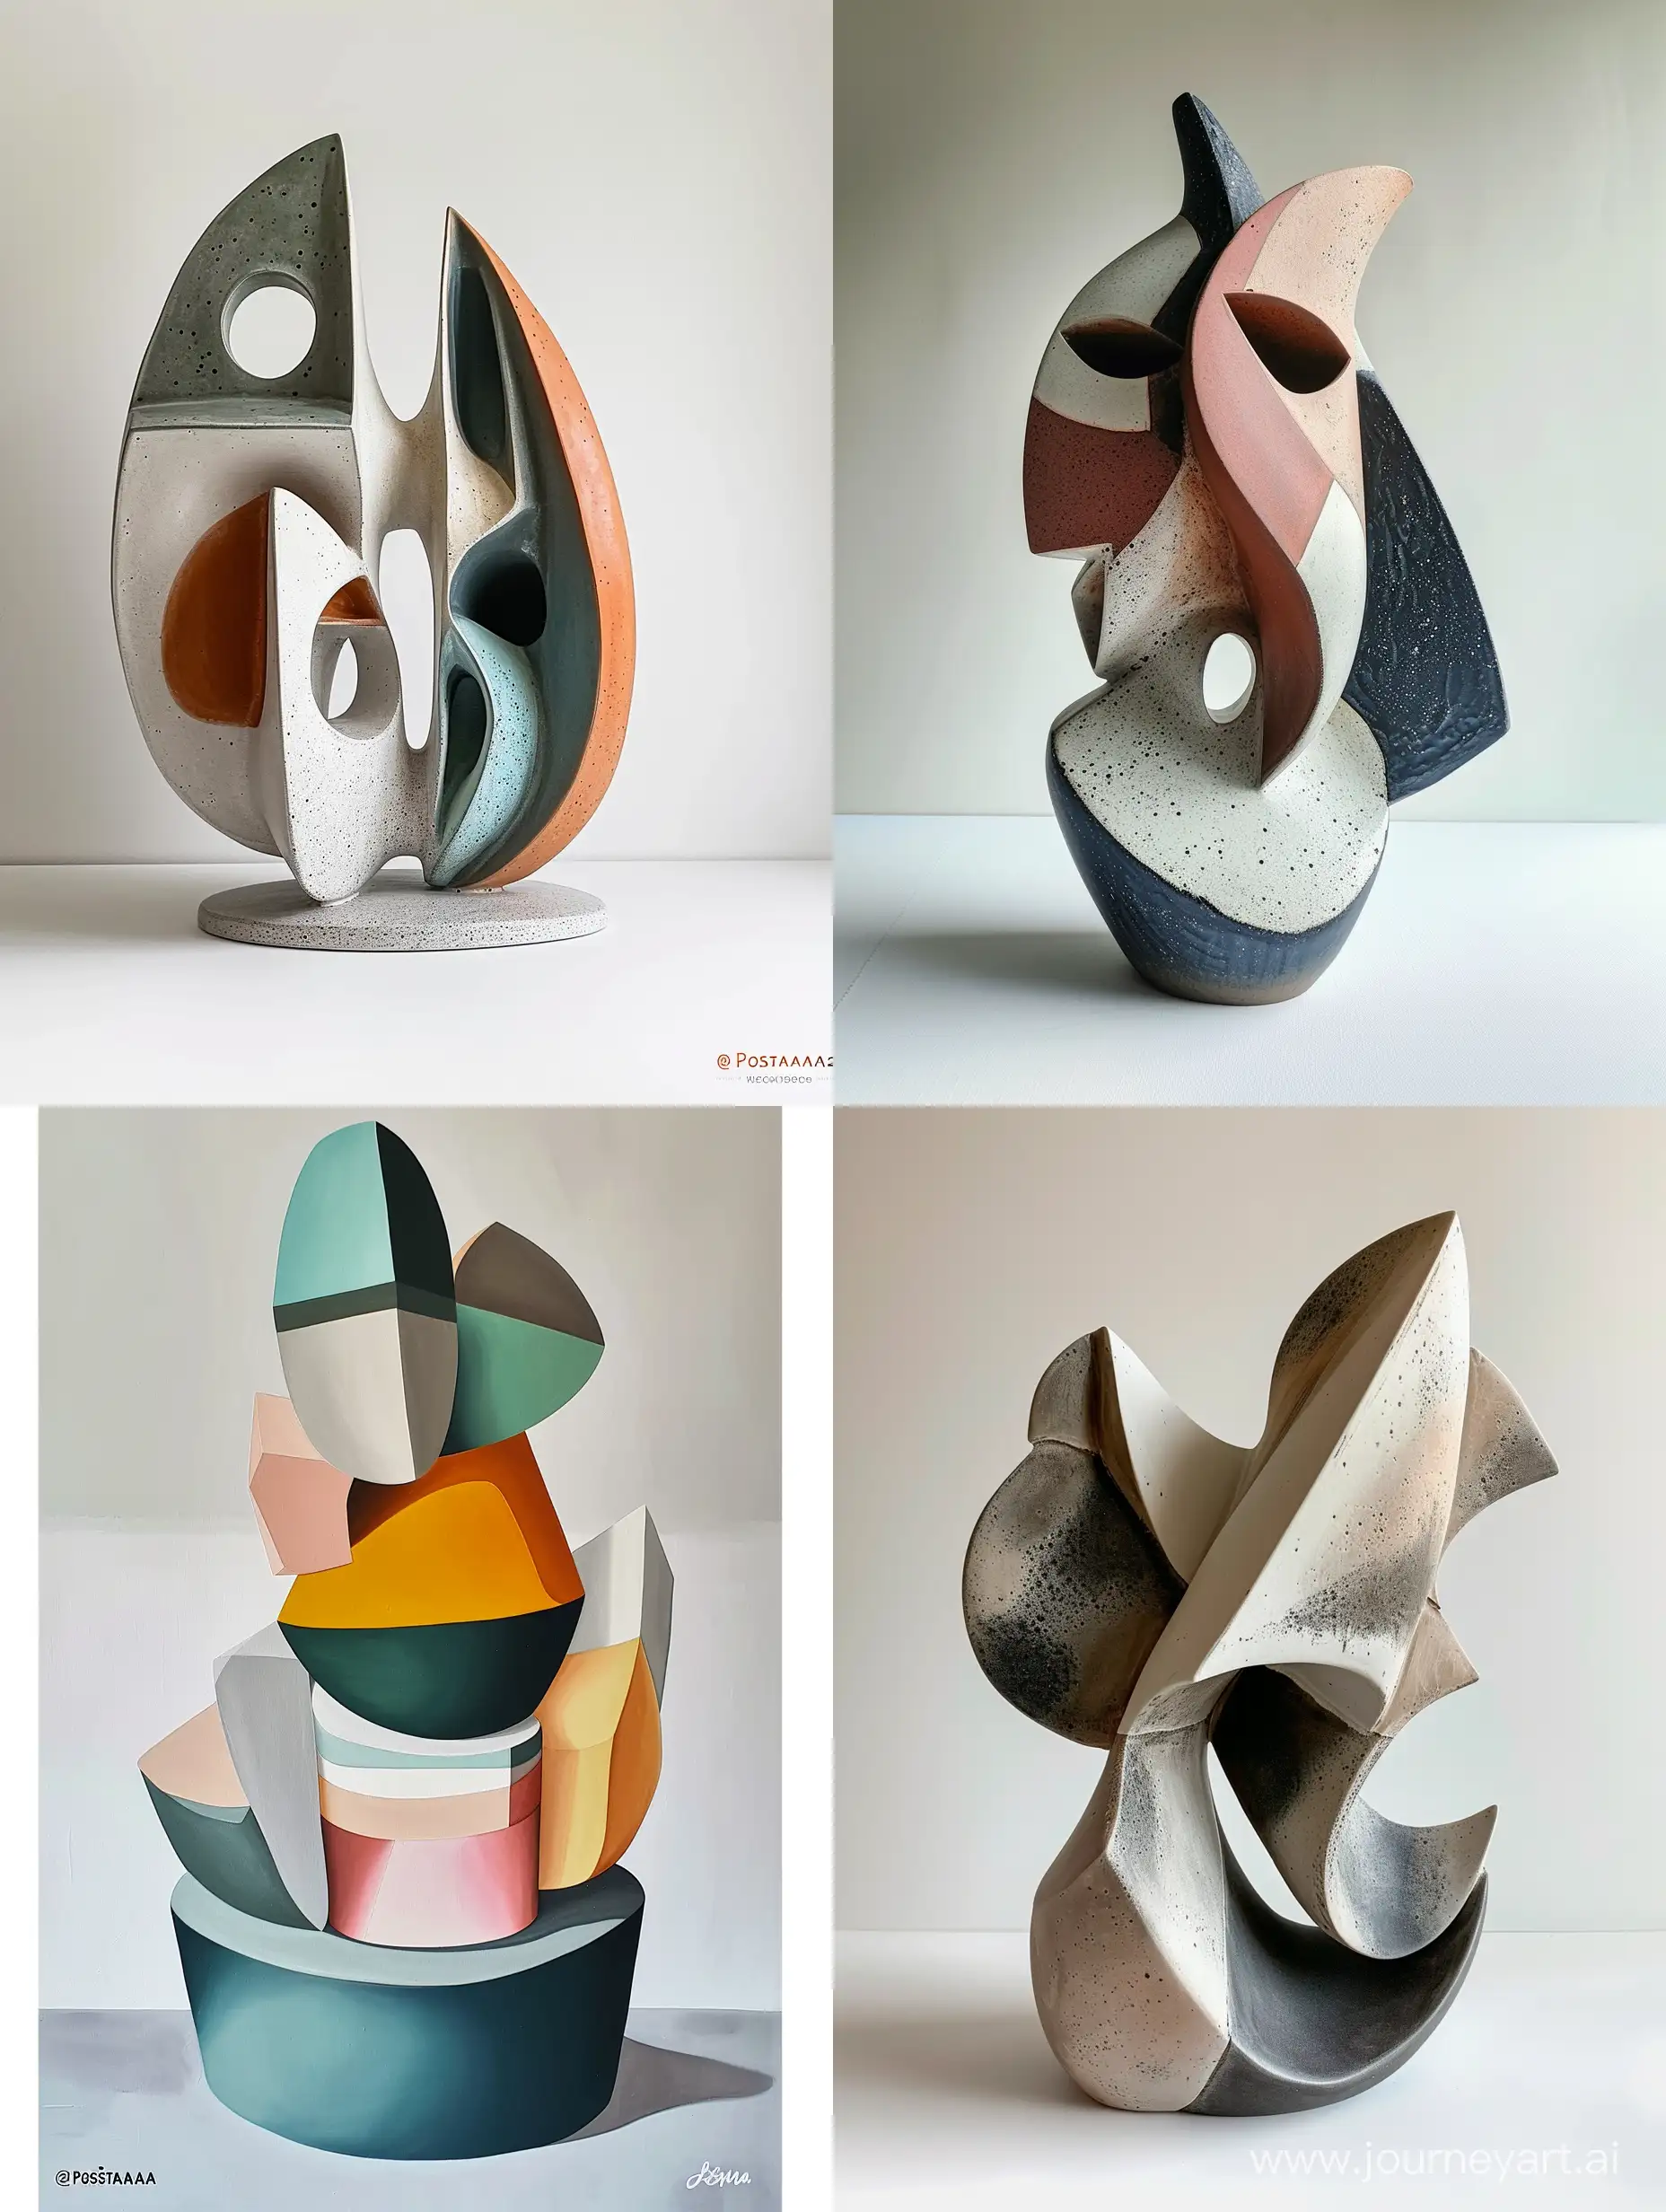 Geometric-Sculpture-Ceramics-with-60s-Style-Abstract-Forms-and-Voluminous-Details